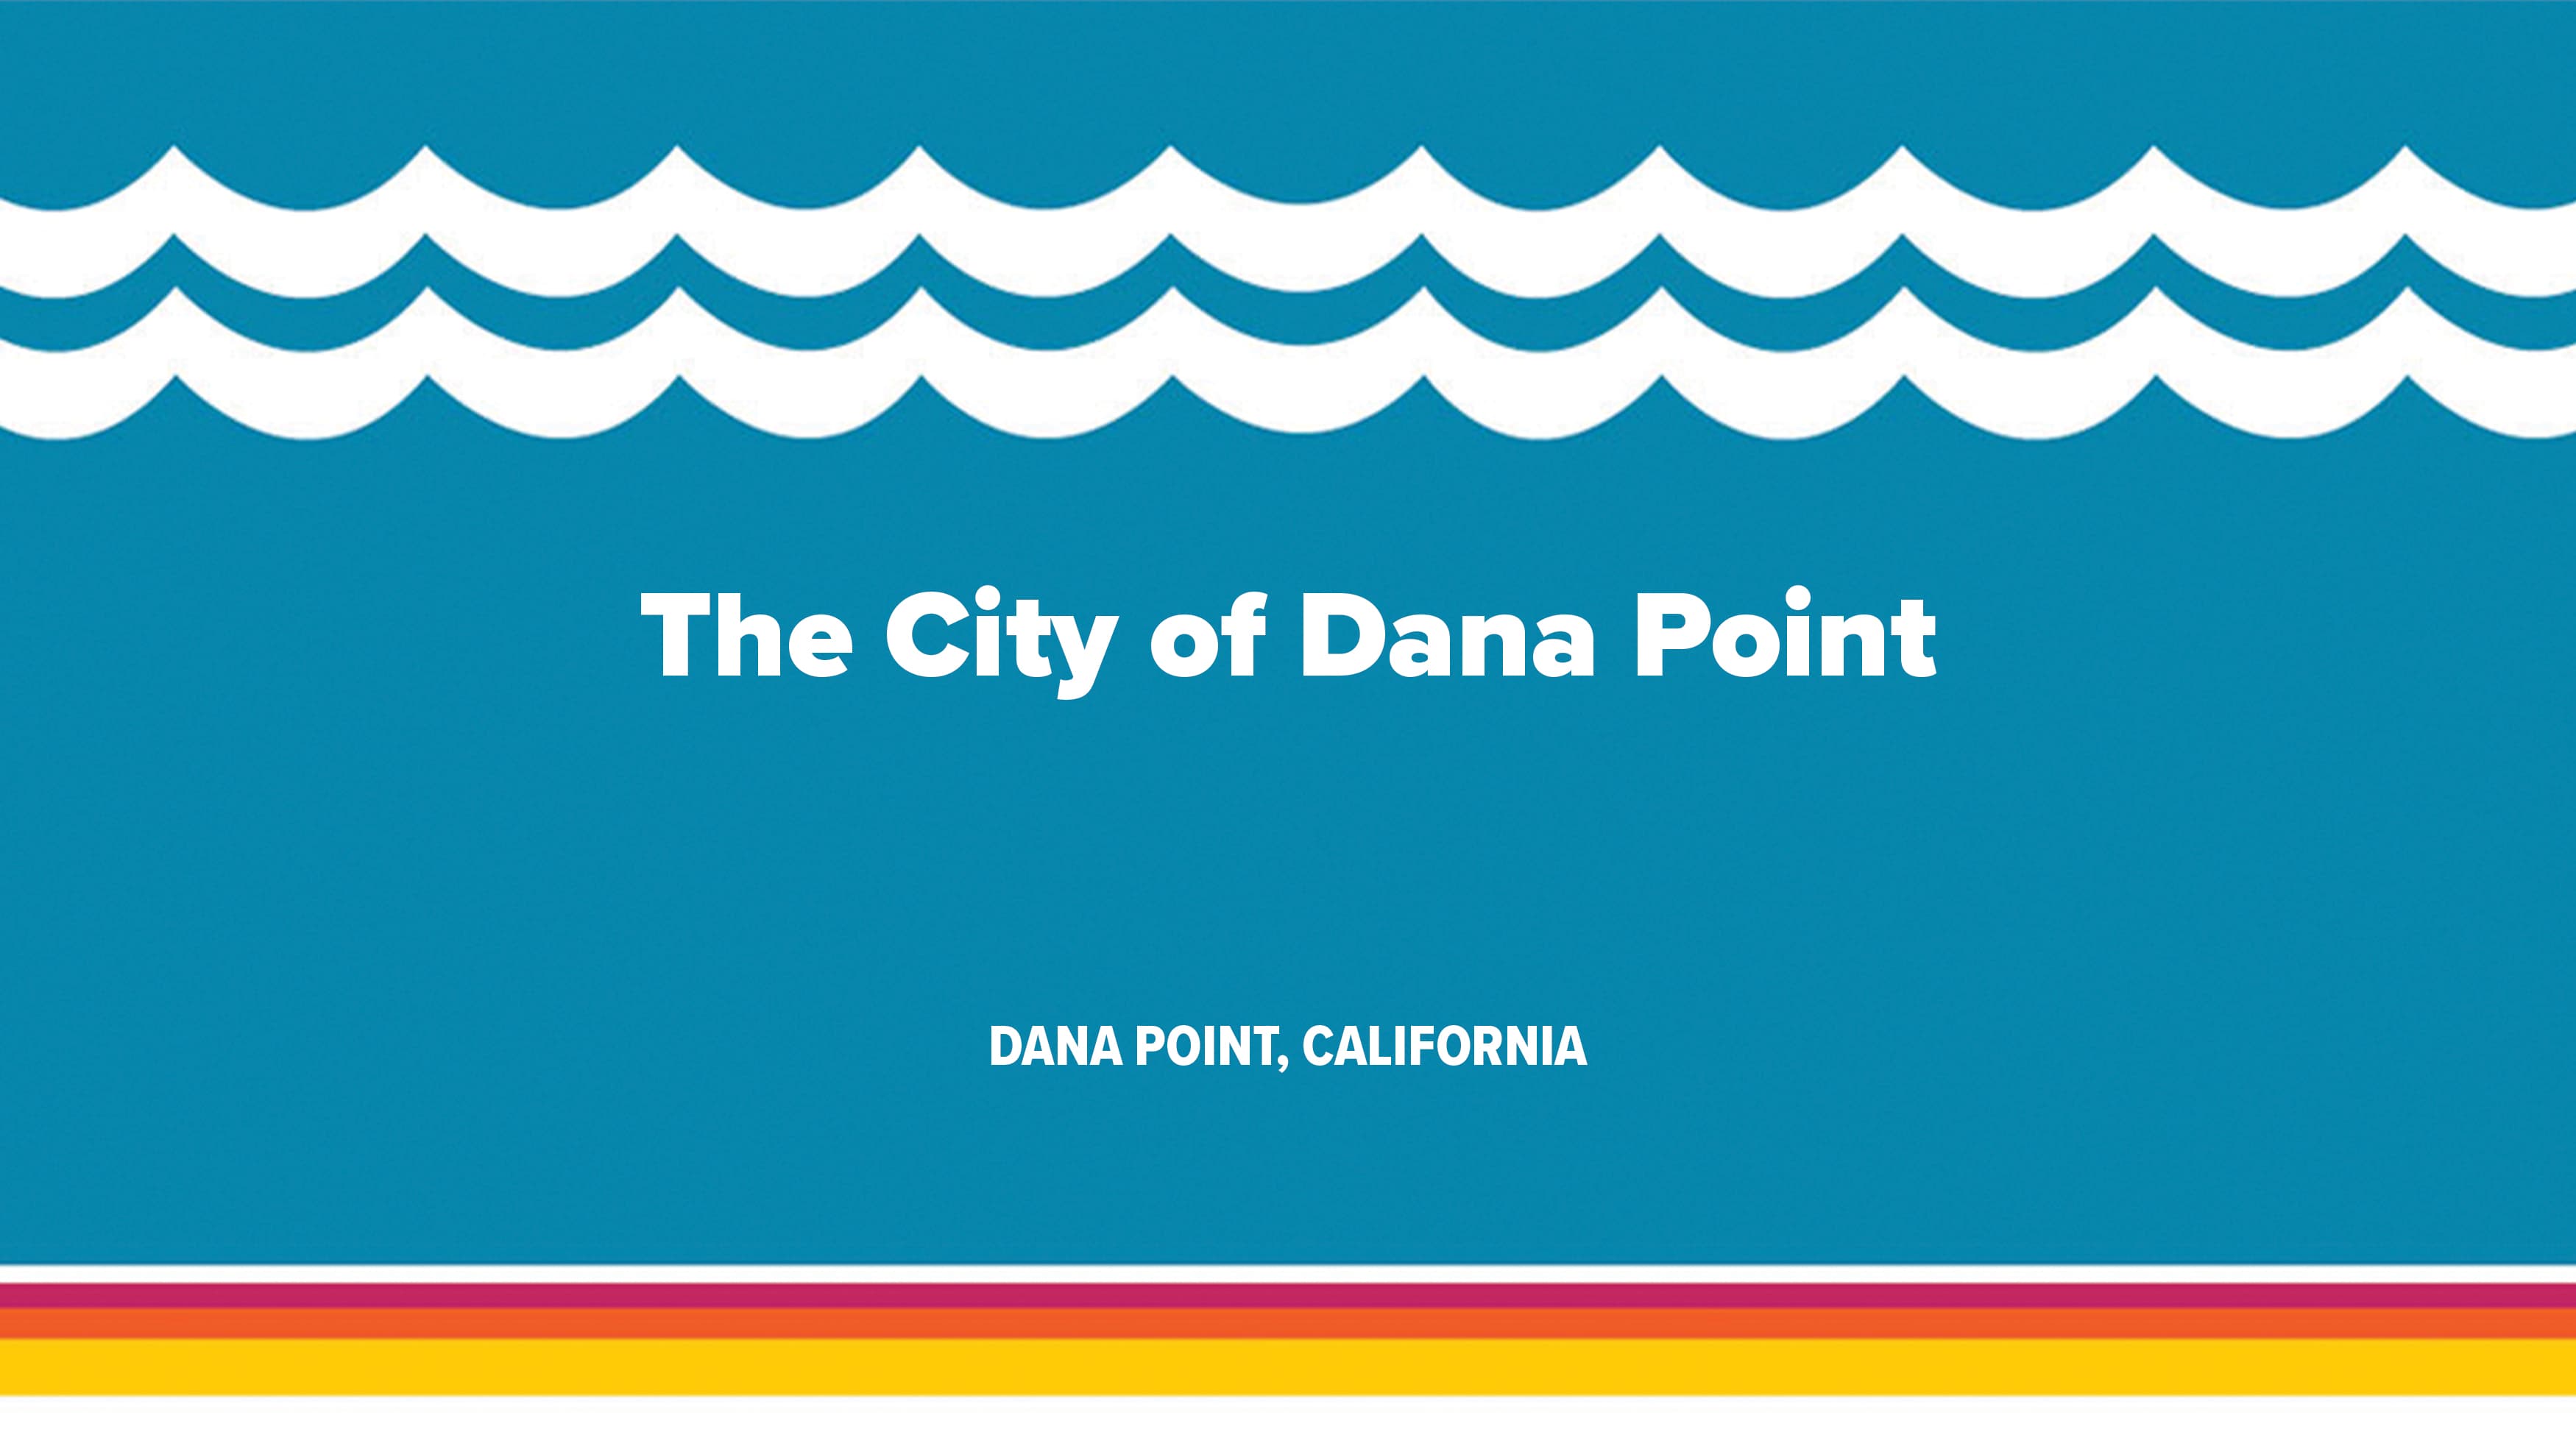 City of Dana Point cover image with retro-style 70s graphic.